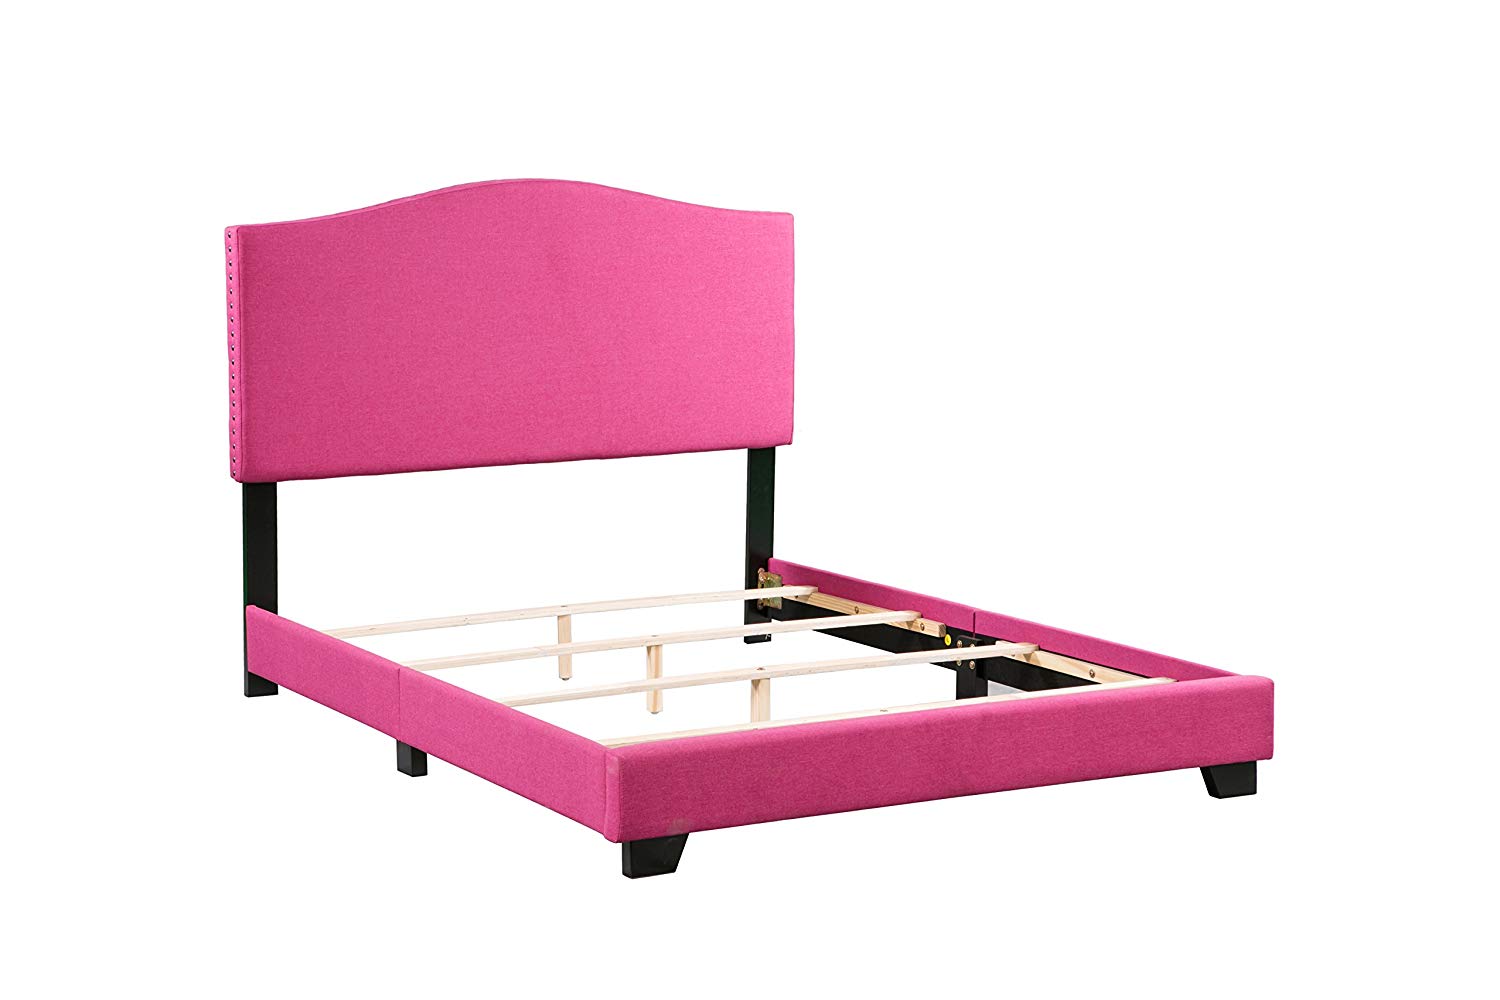 Boraam 95142 Dione Bed In A Box, Full, Pink